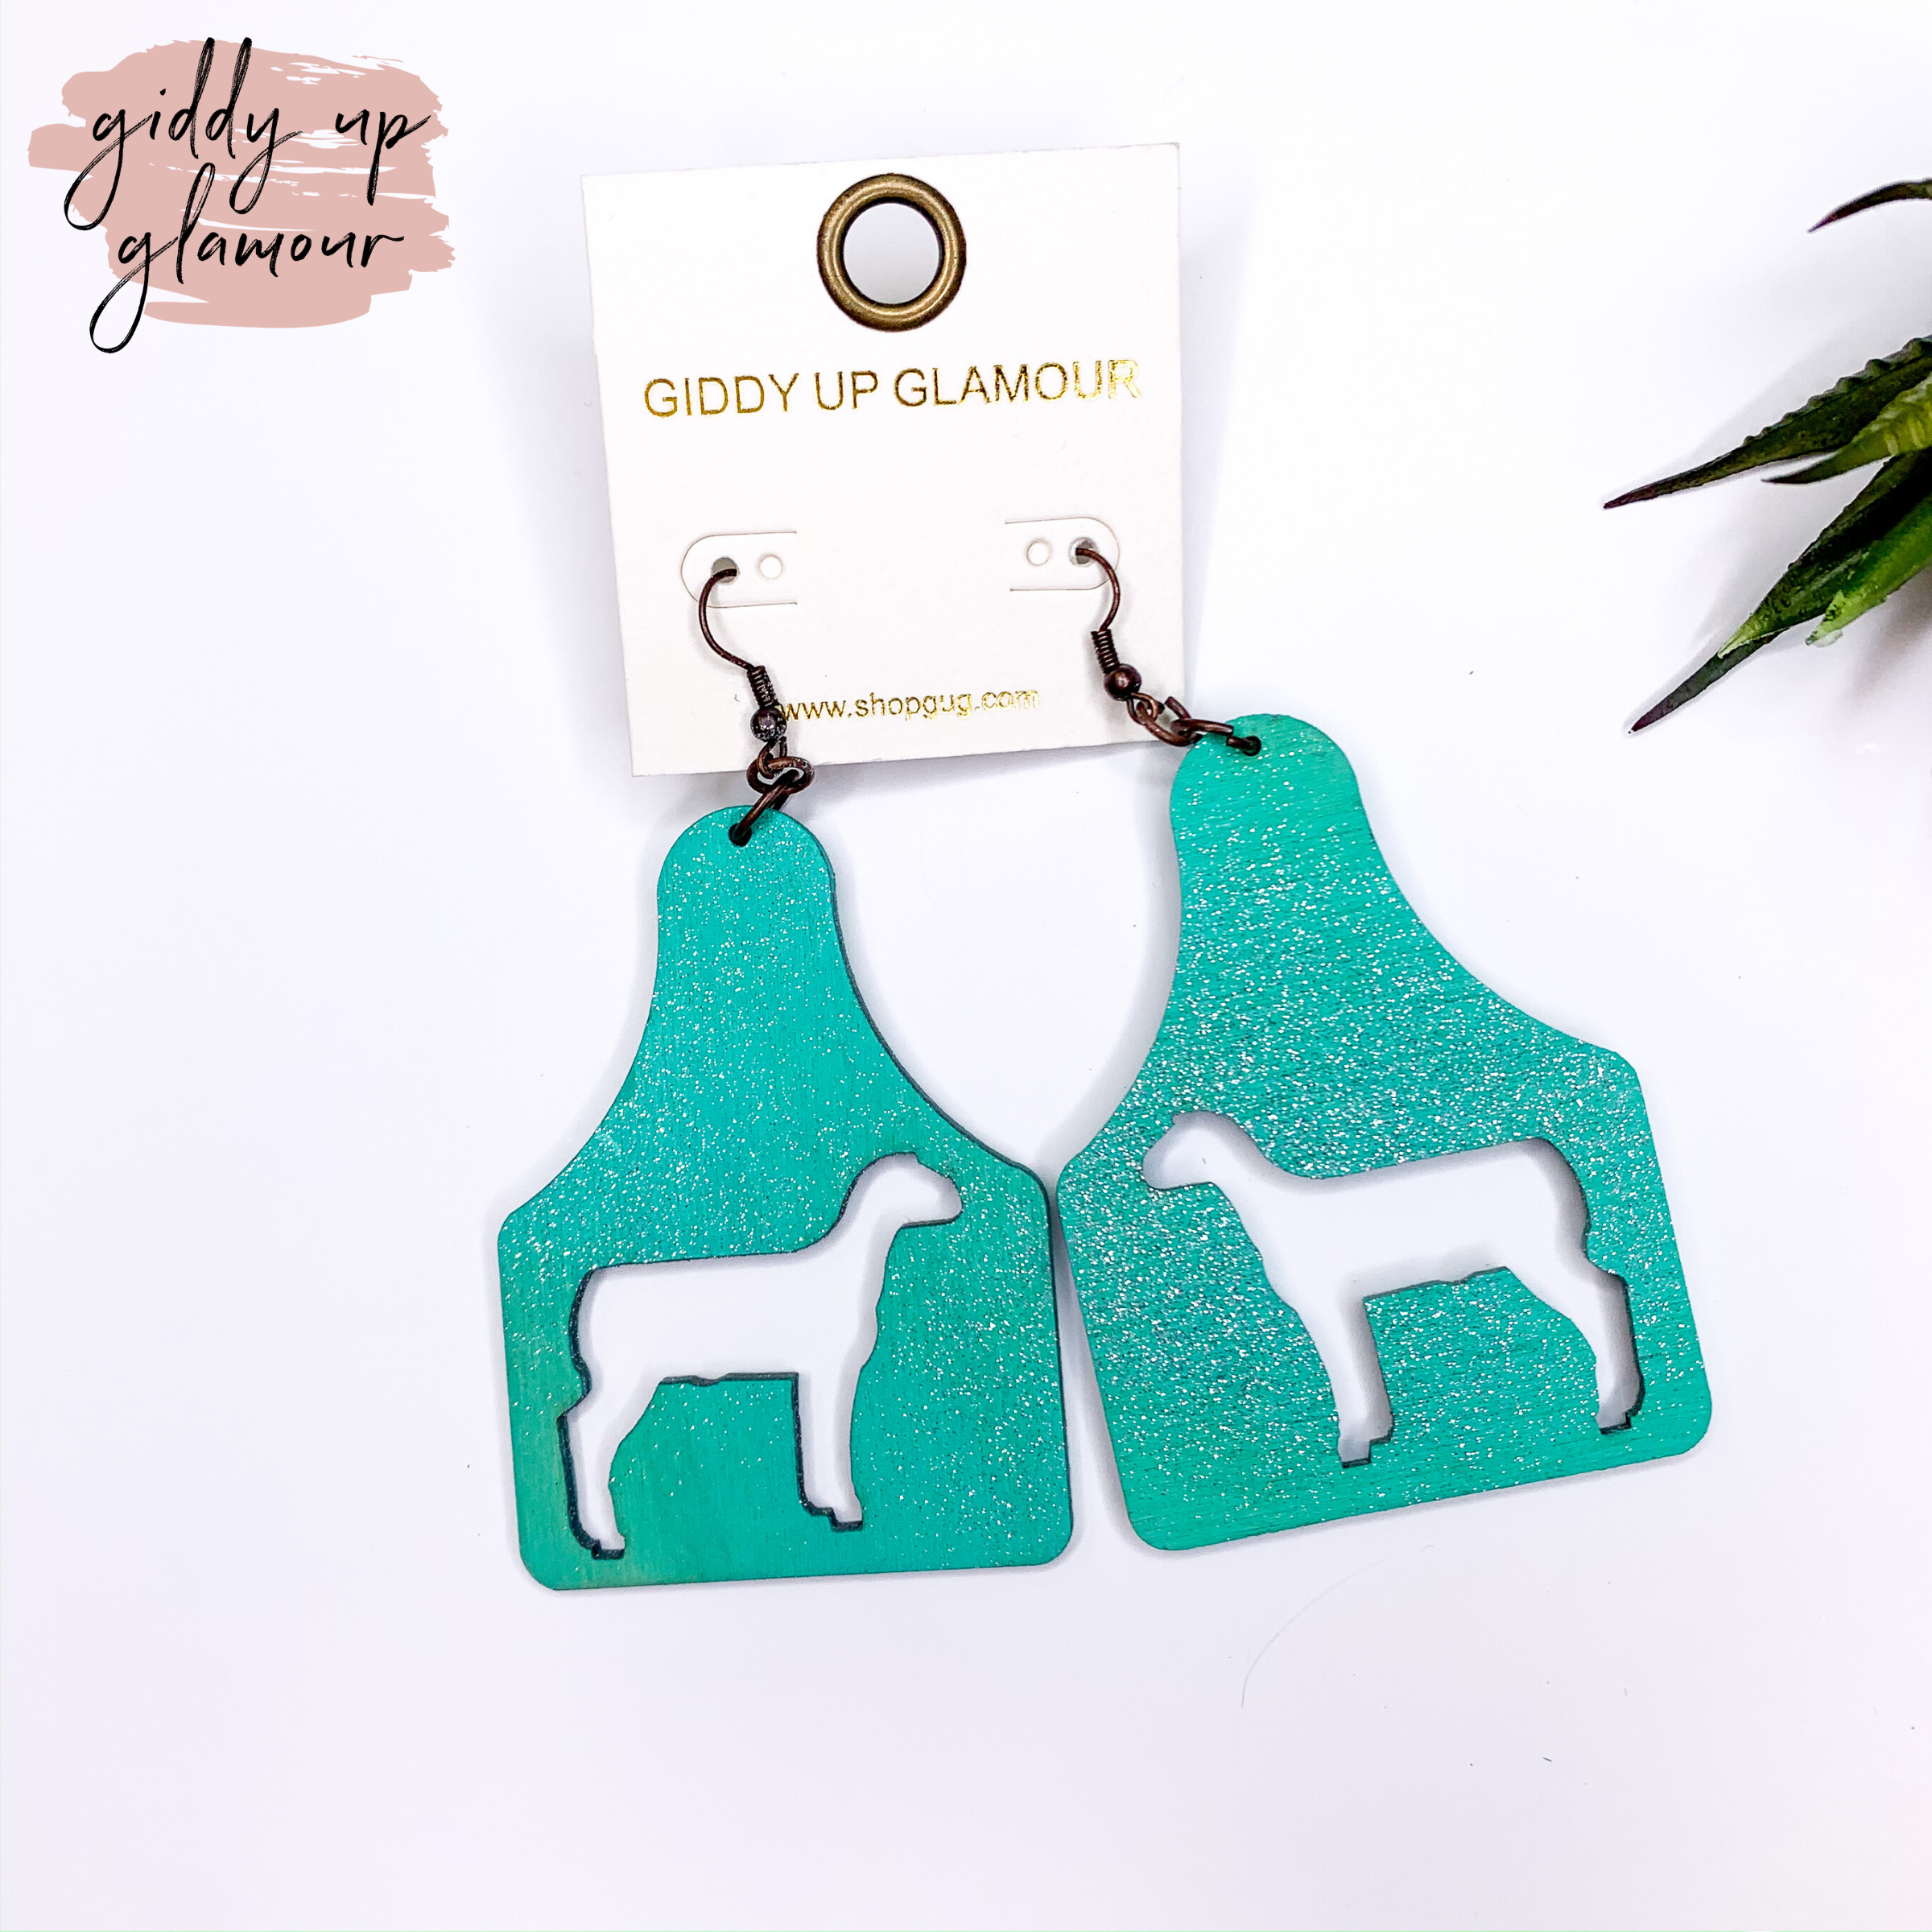 Ear Tag Earrings with Sheep Cut Outs in Turquoise - Giddy Up Glamour Boutique